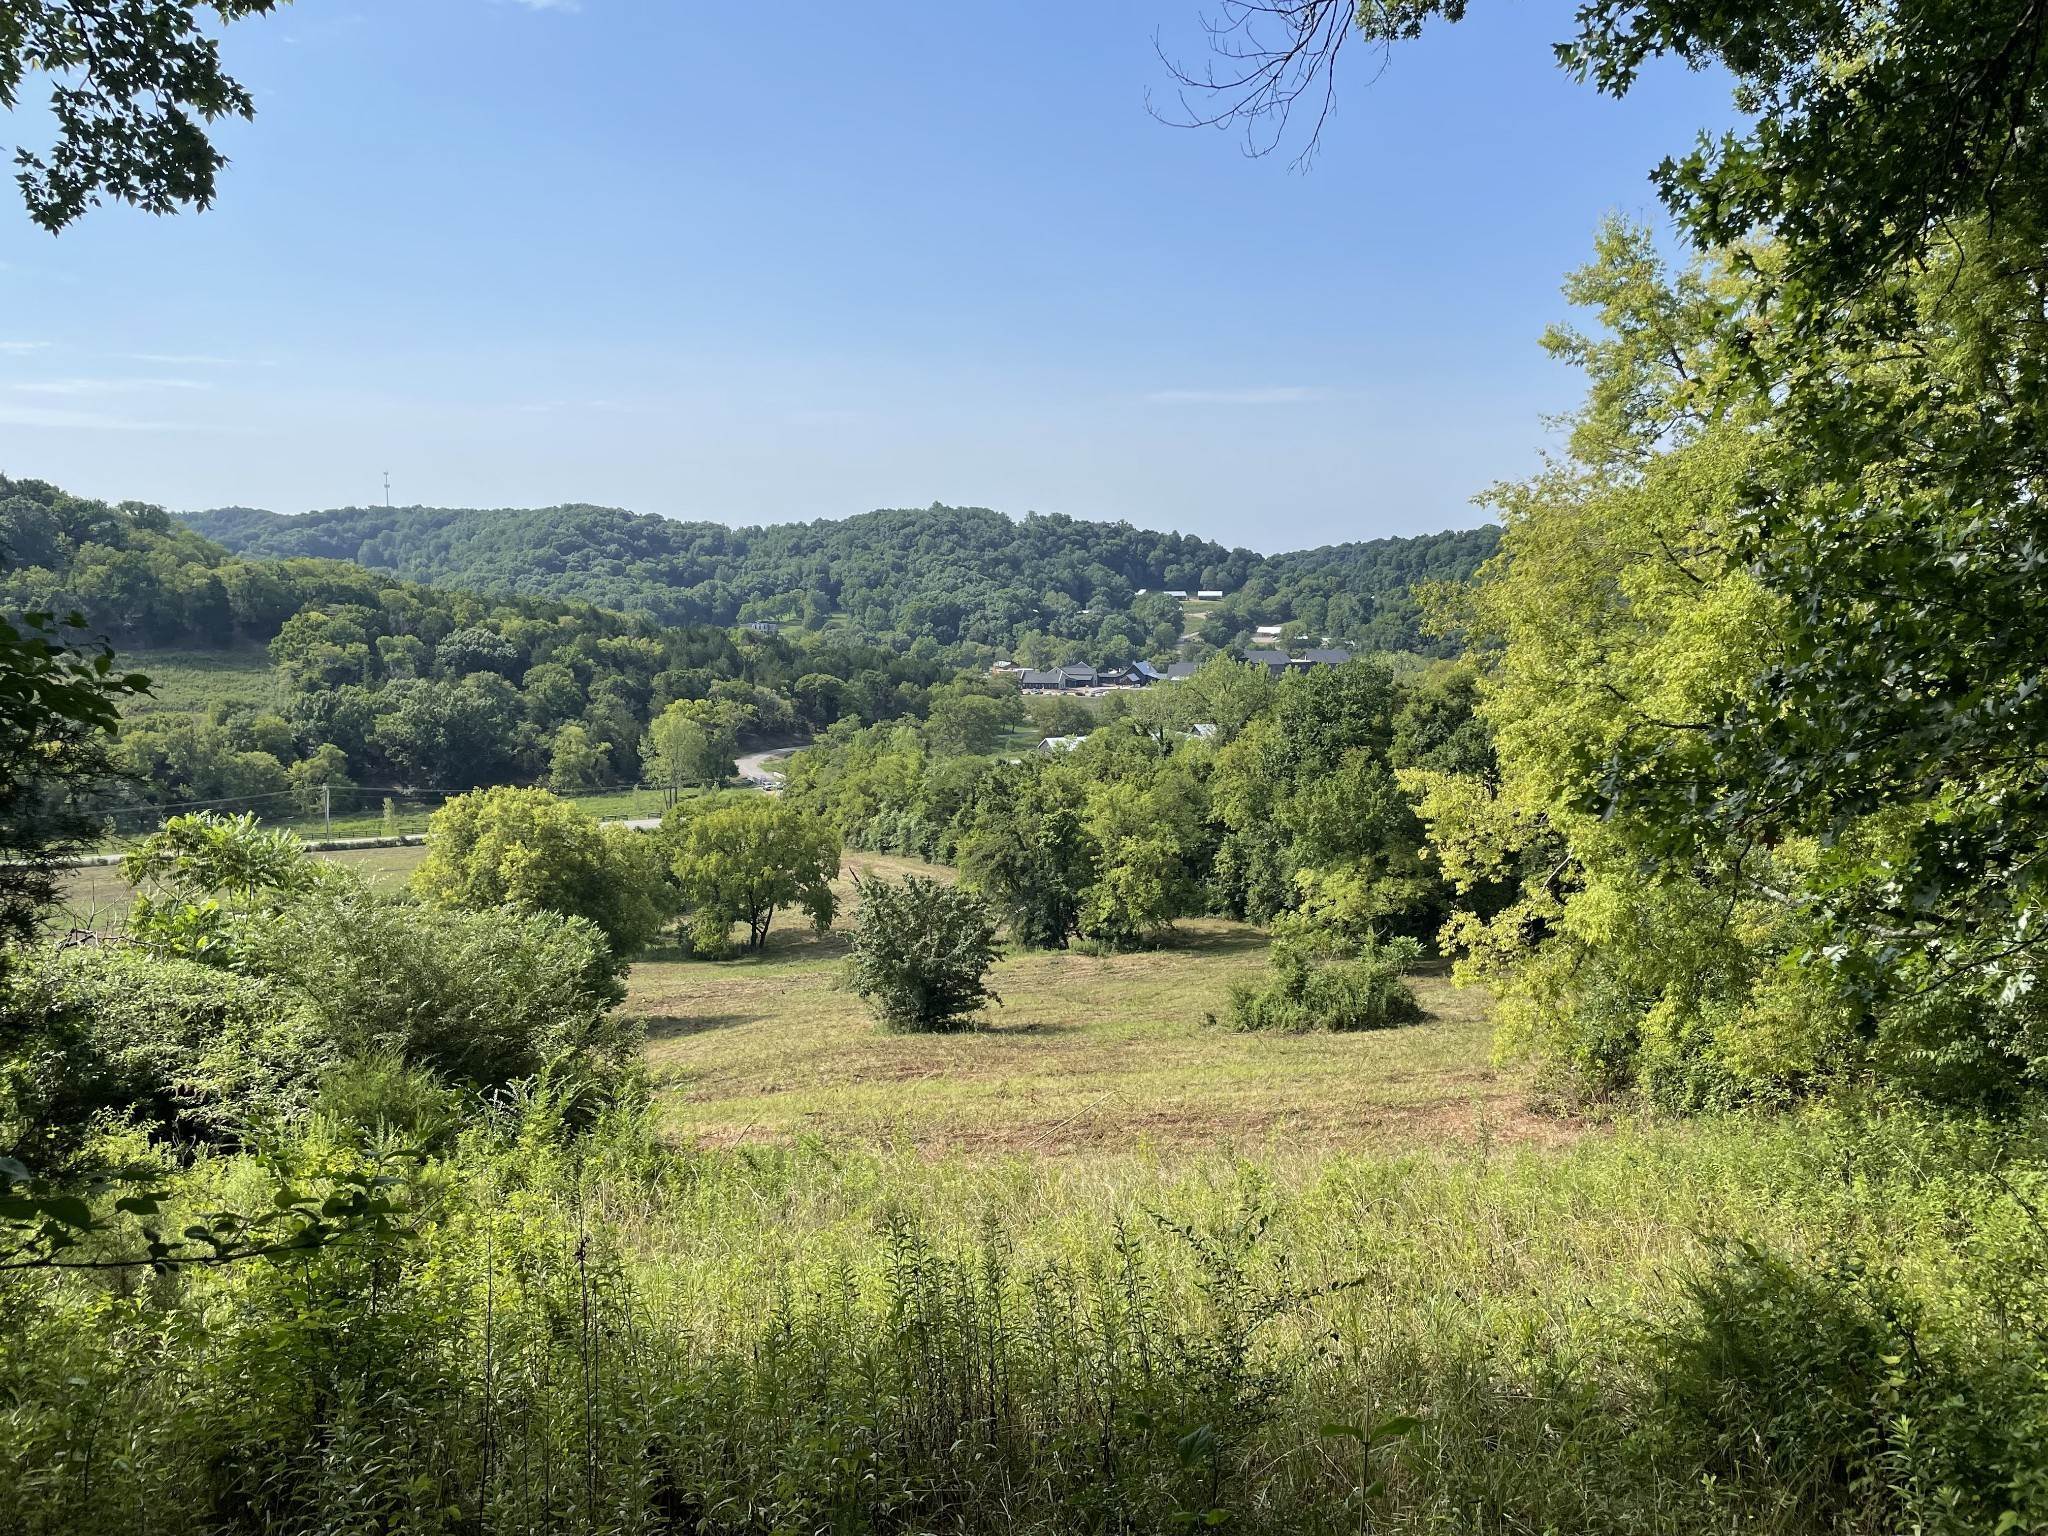 Property for Sale at 1951 Carters Creek Pike Franklin, Tennessee 37064 United States